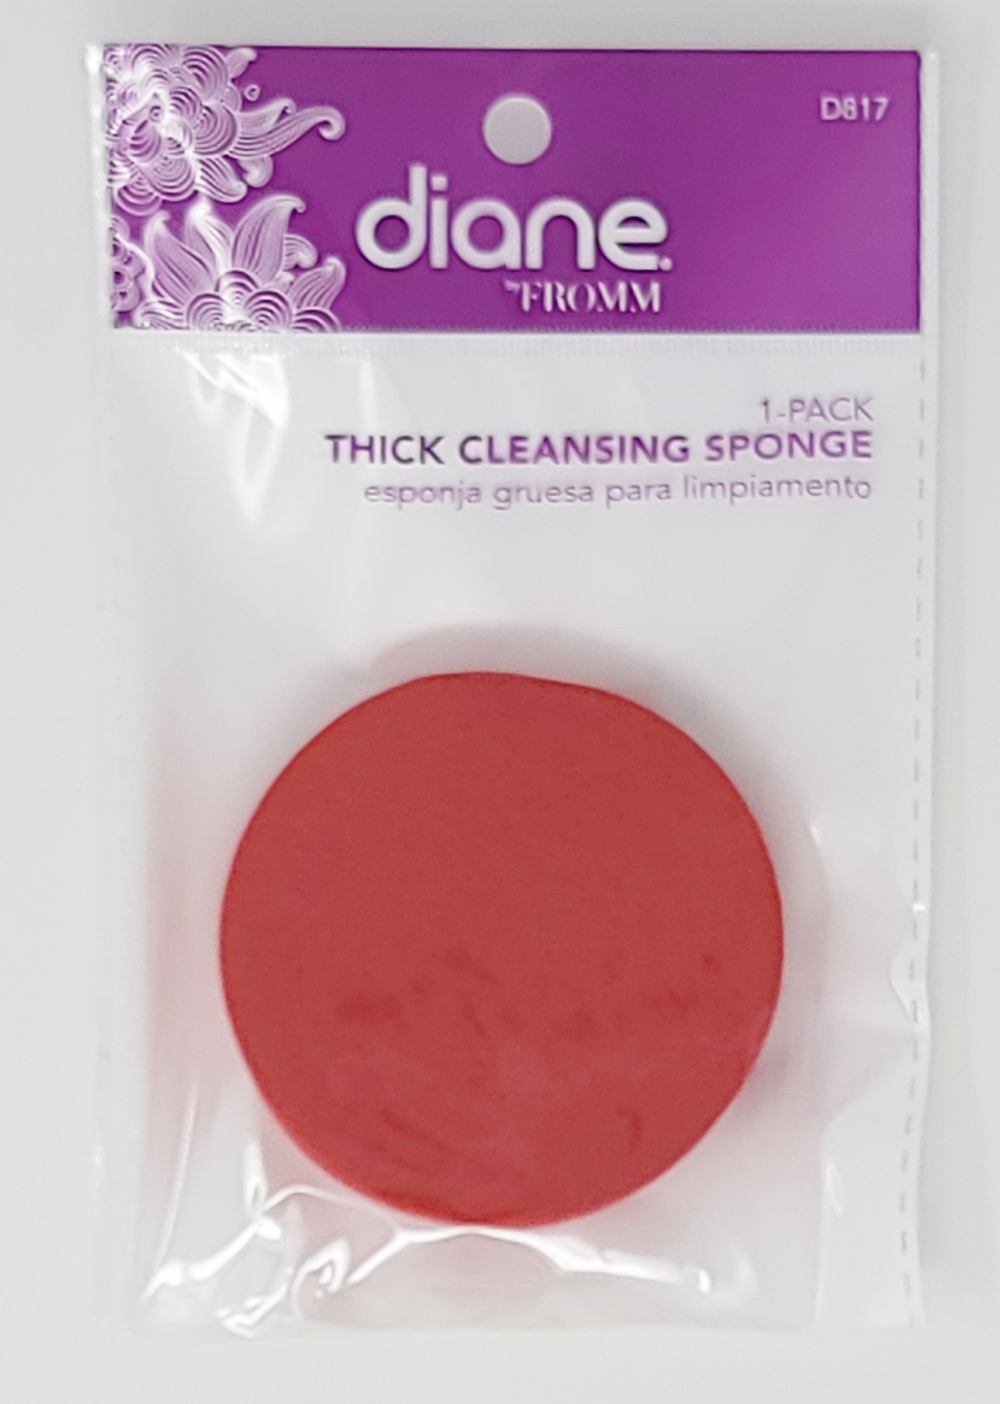 DIANE THICK CLEANSING SPONGE, RED 1 PACK UPC # 824703000293